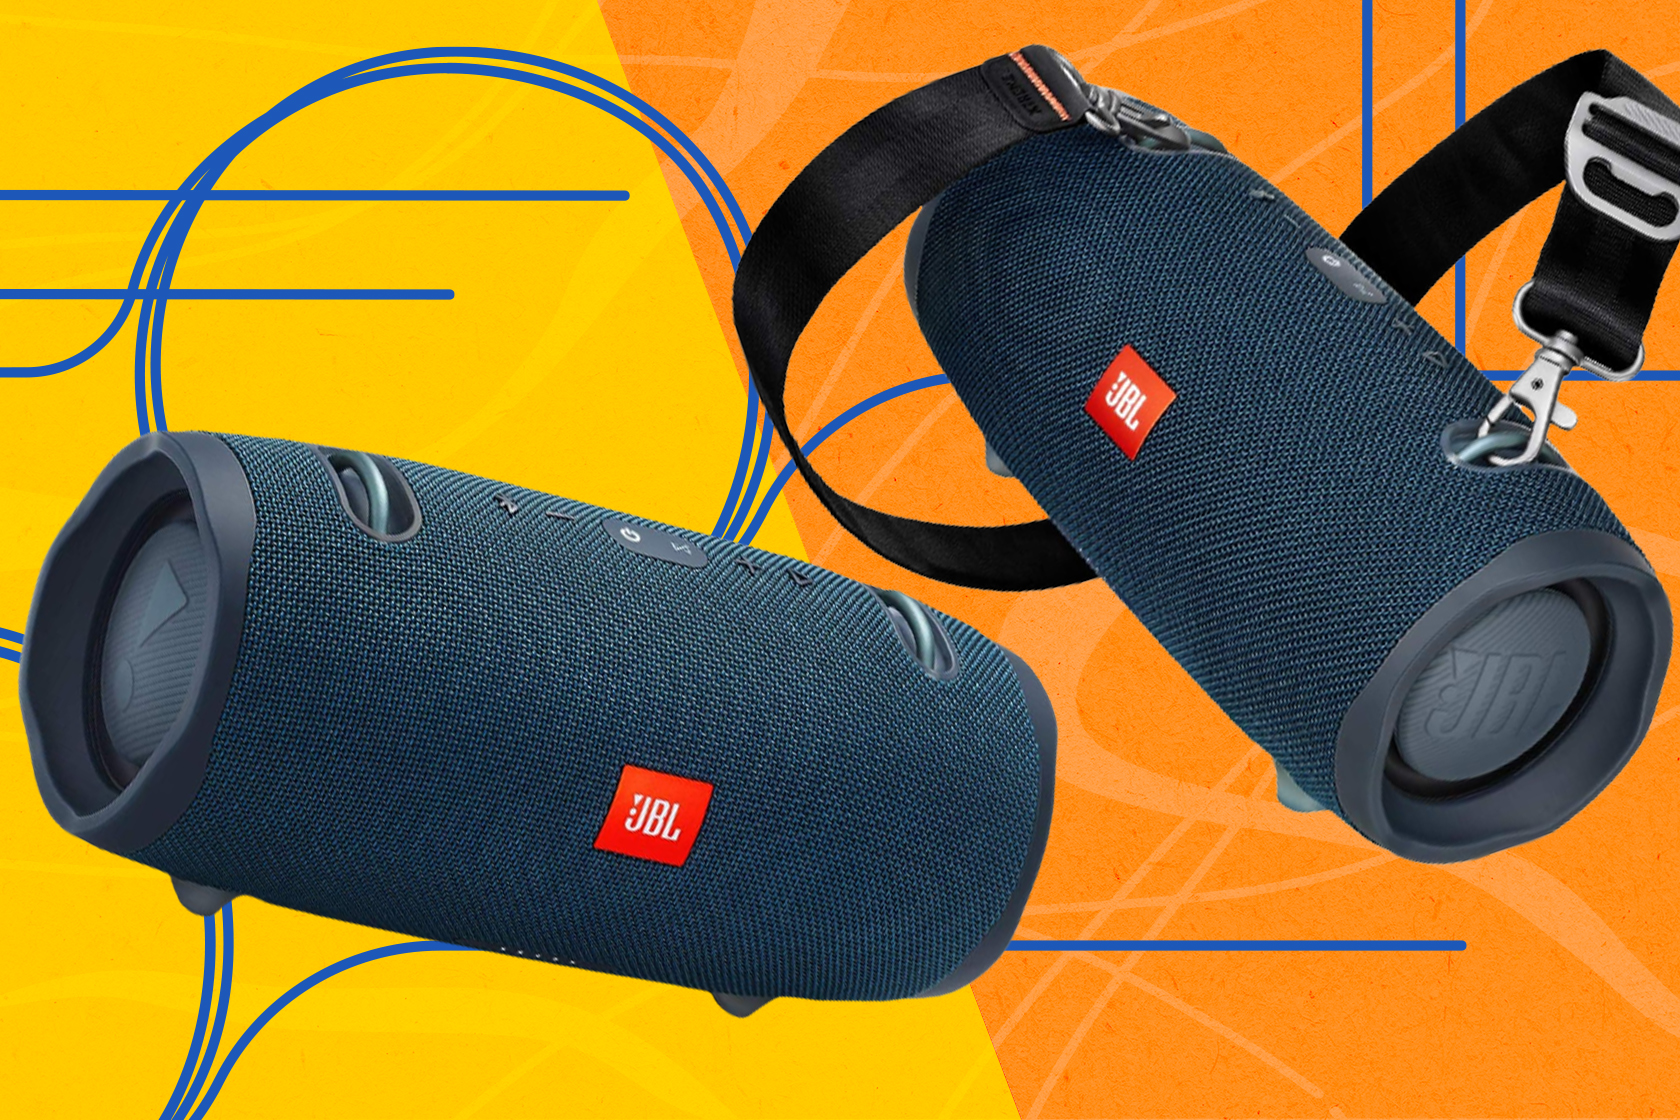 This JBL portable speaker is over 55% off, thanks to Amazon